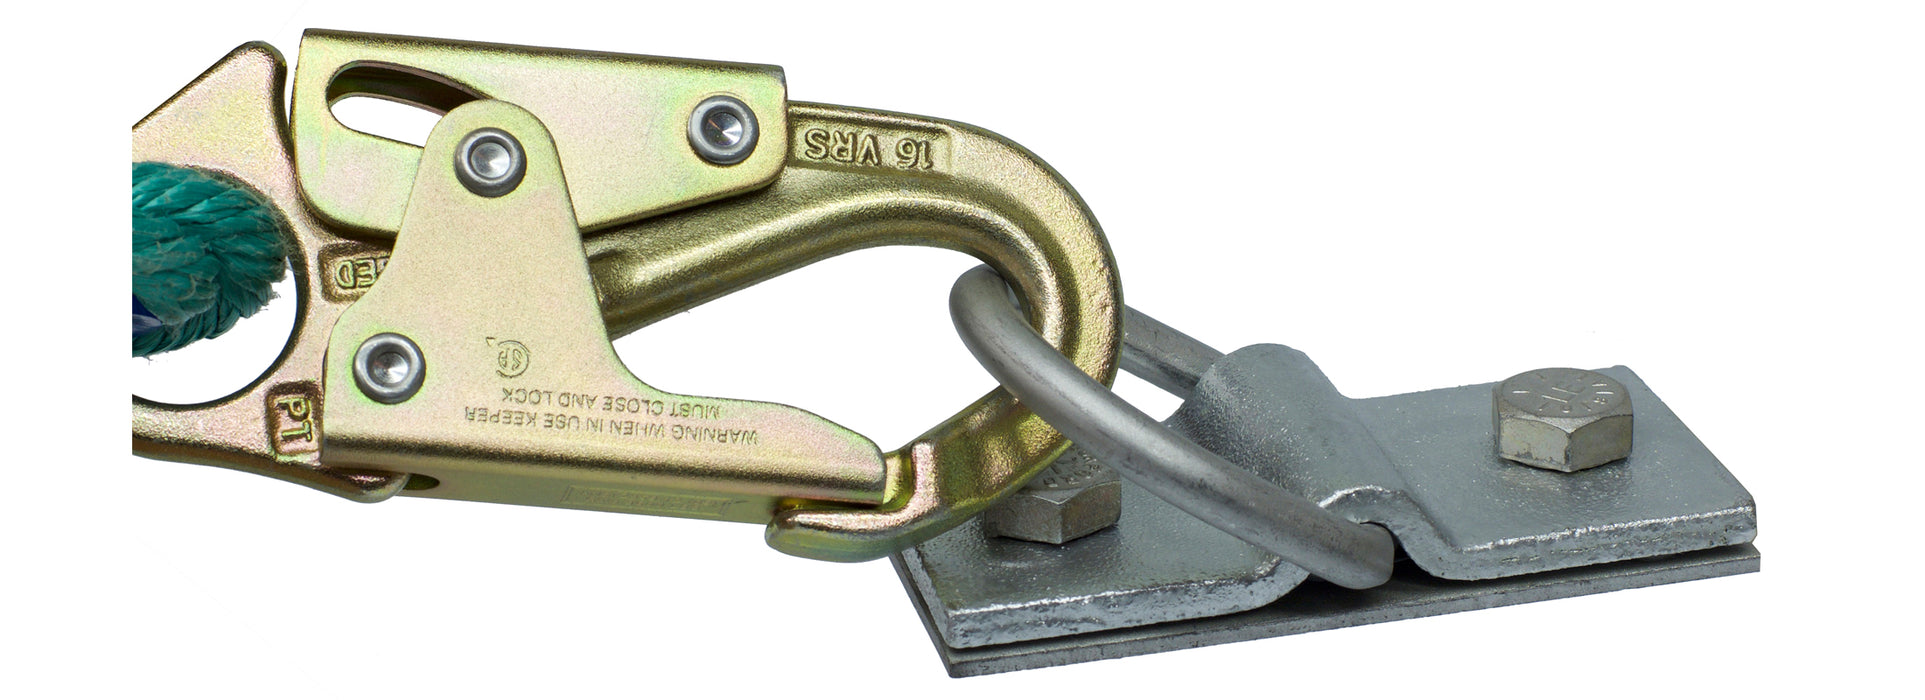 Super Anchor D-ShakL Shackle Safety Anchor with 180-Degree rotating D-Ring - 1029